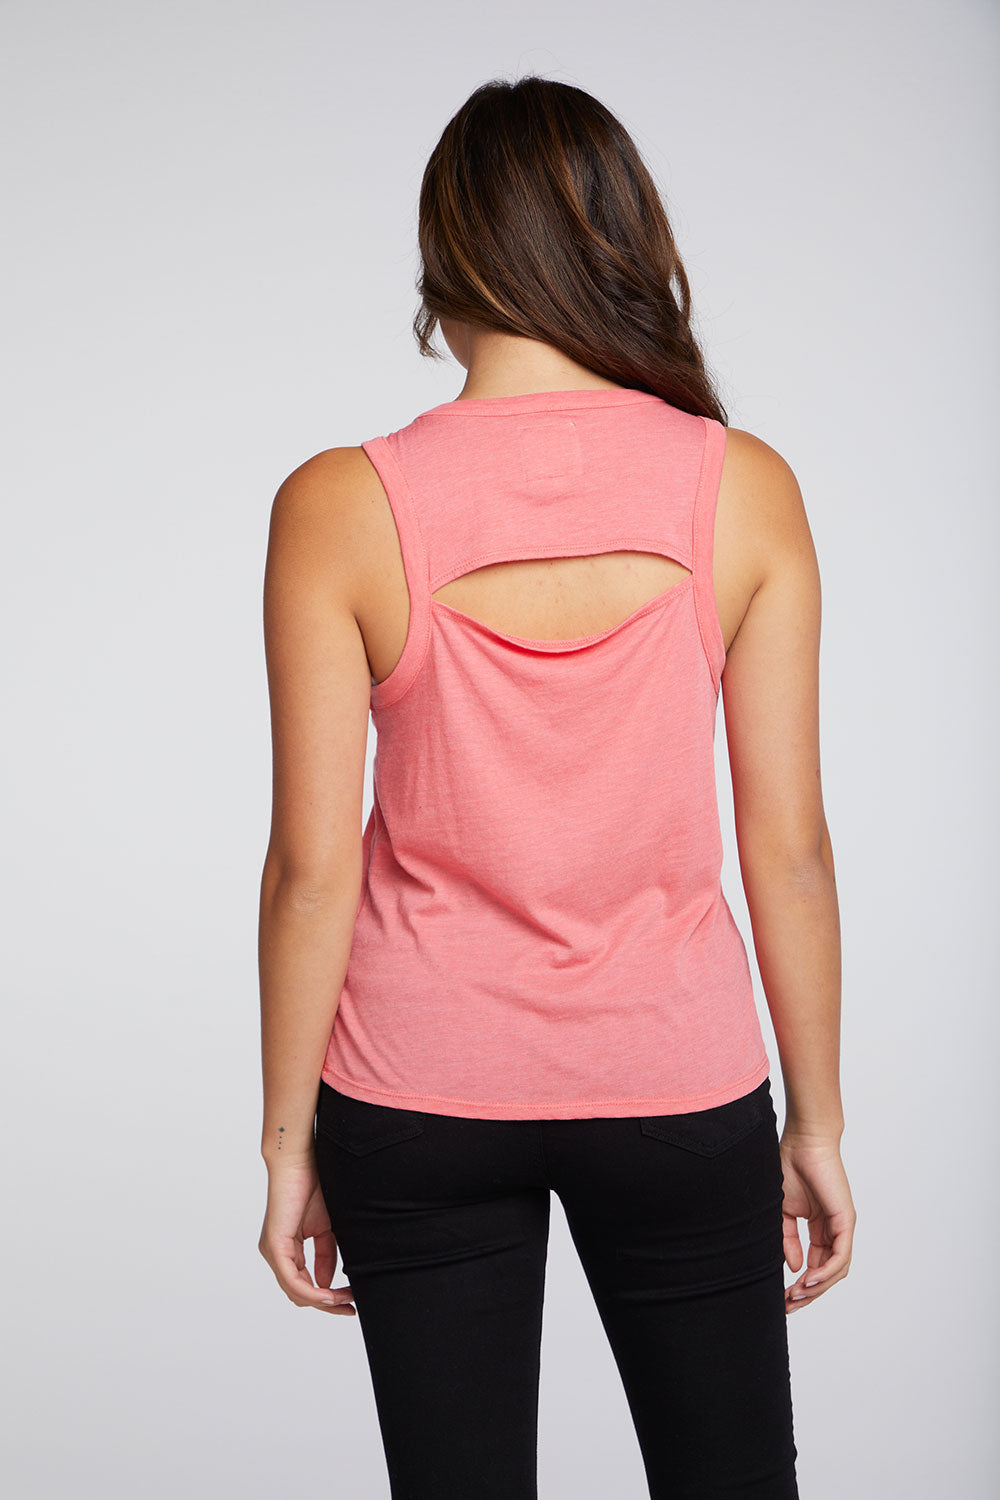 Recycled Vintage Jersey Slit Back Hi Lo Muscle Tank WOMENS chaserbrand